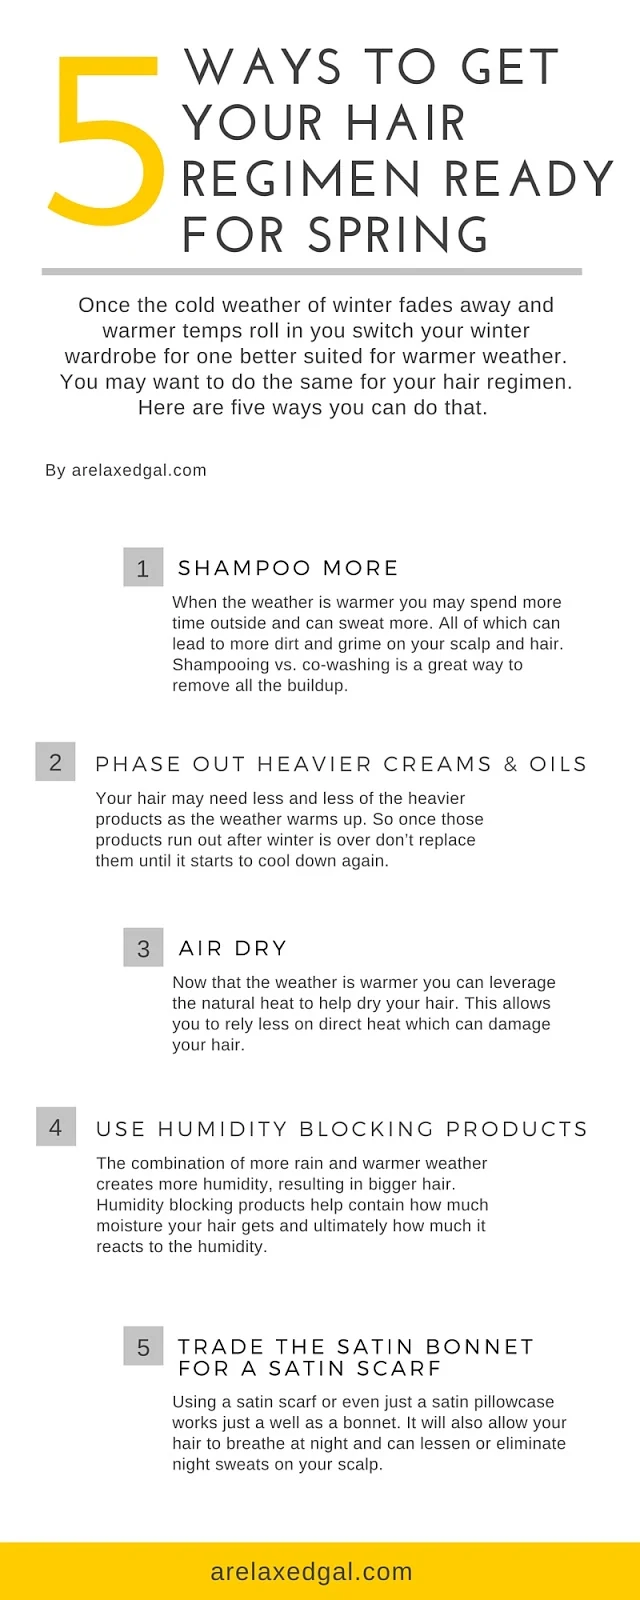 With the coming of spring comes longer days, more sun, warmer weather and possibly more rain showers. With each changing season I like to evaluate the hair care products I use and see if anything needs to be put phased out or if I need to a new product. | arelaxedgal.com